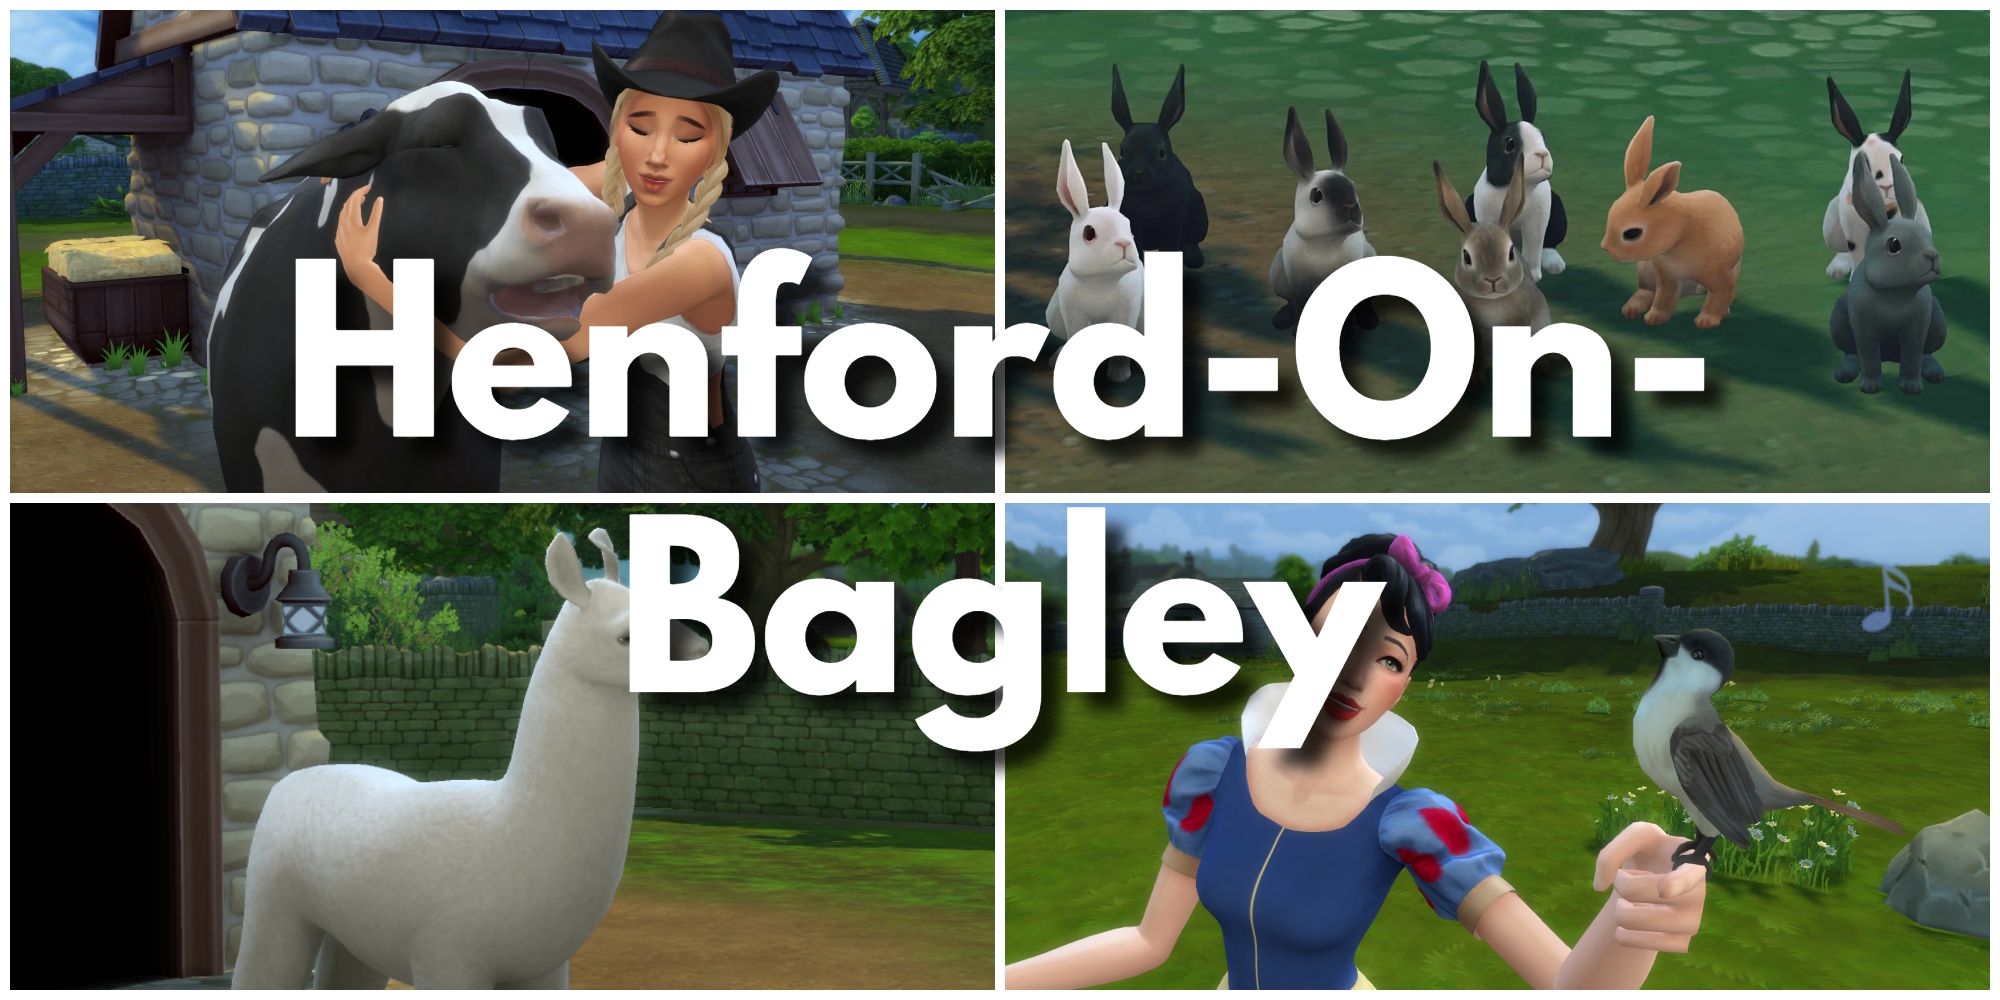 Players with the Cottage Living pack can enjoy Henford-On-Bagley, filled with cows, chickens, llamas, foxes, birds, and rabbits for animal-lovers to enjoy.